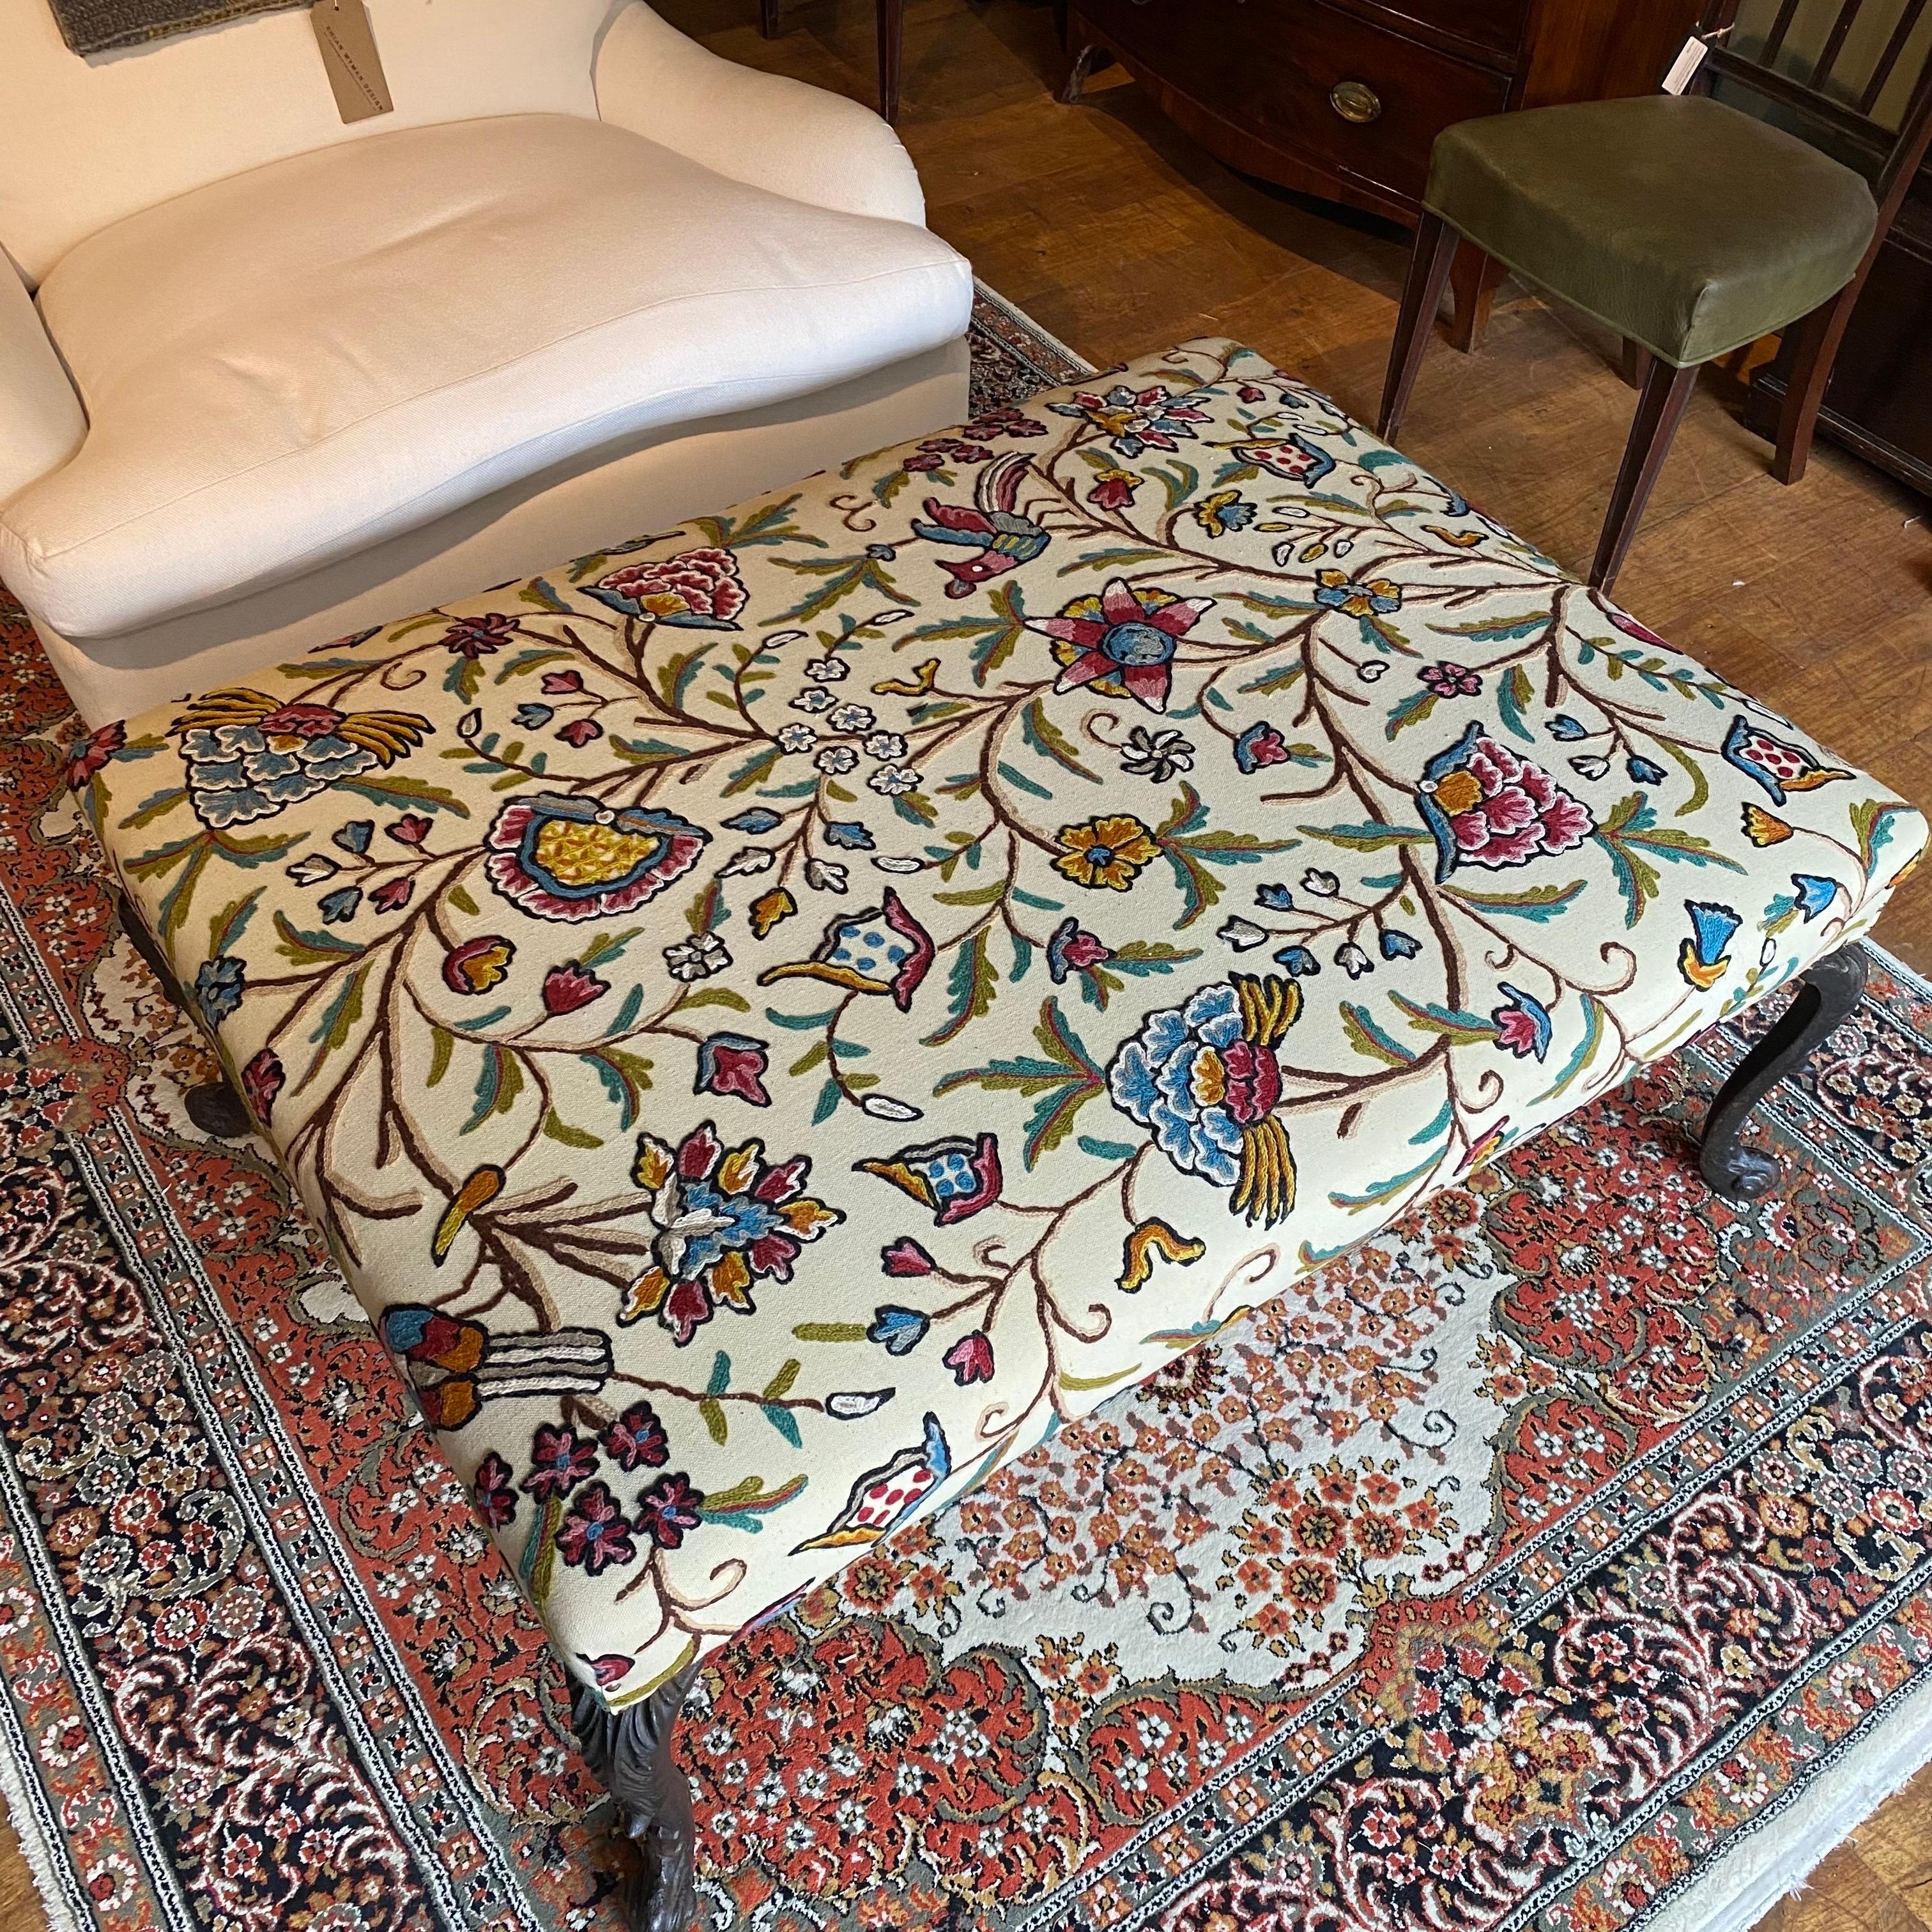 Beautiful bespoke made footstool / ottoman. 

A unique piece based around 4 cast iron legs, a modern handmade frame and then traditionally upholstered using a vintage crewel work. 

